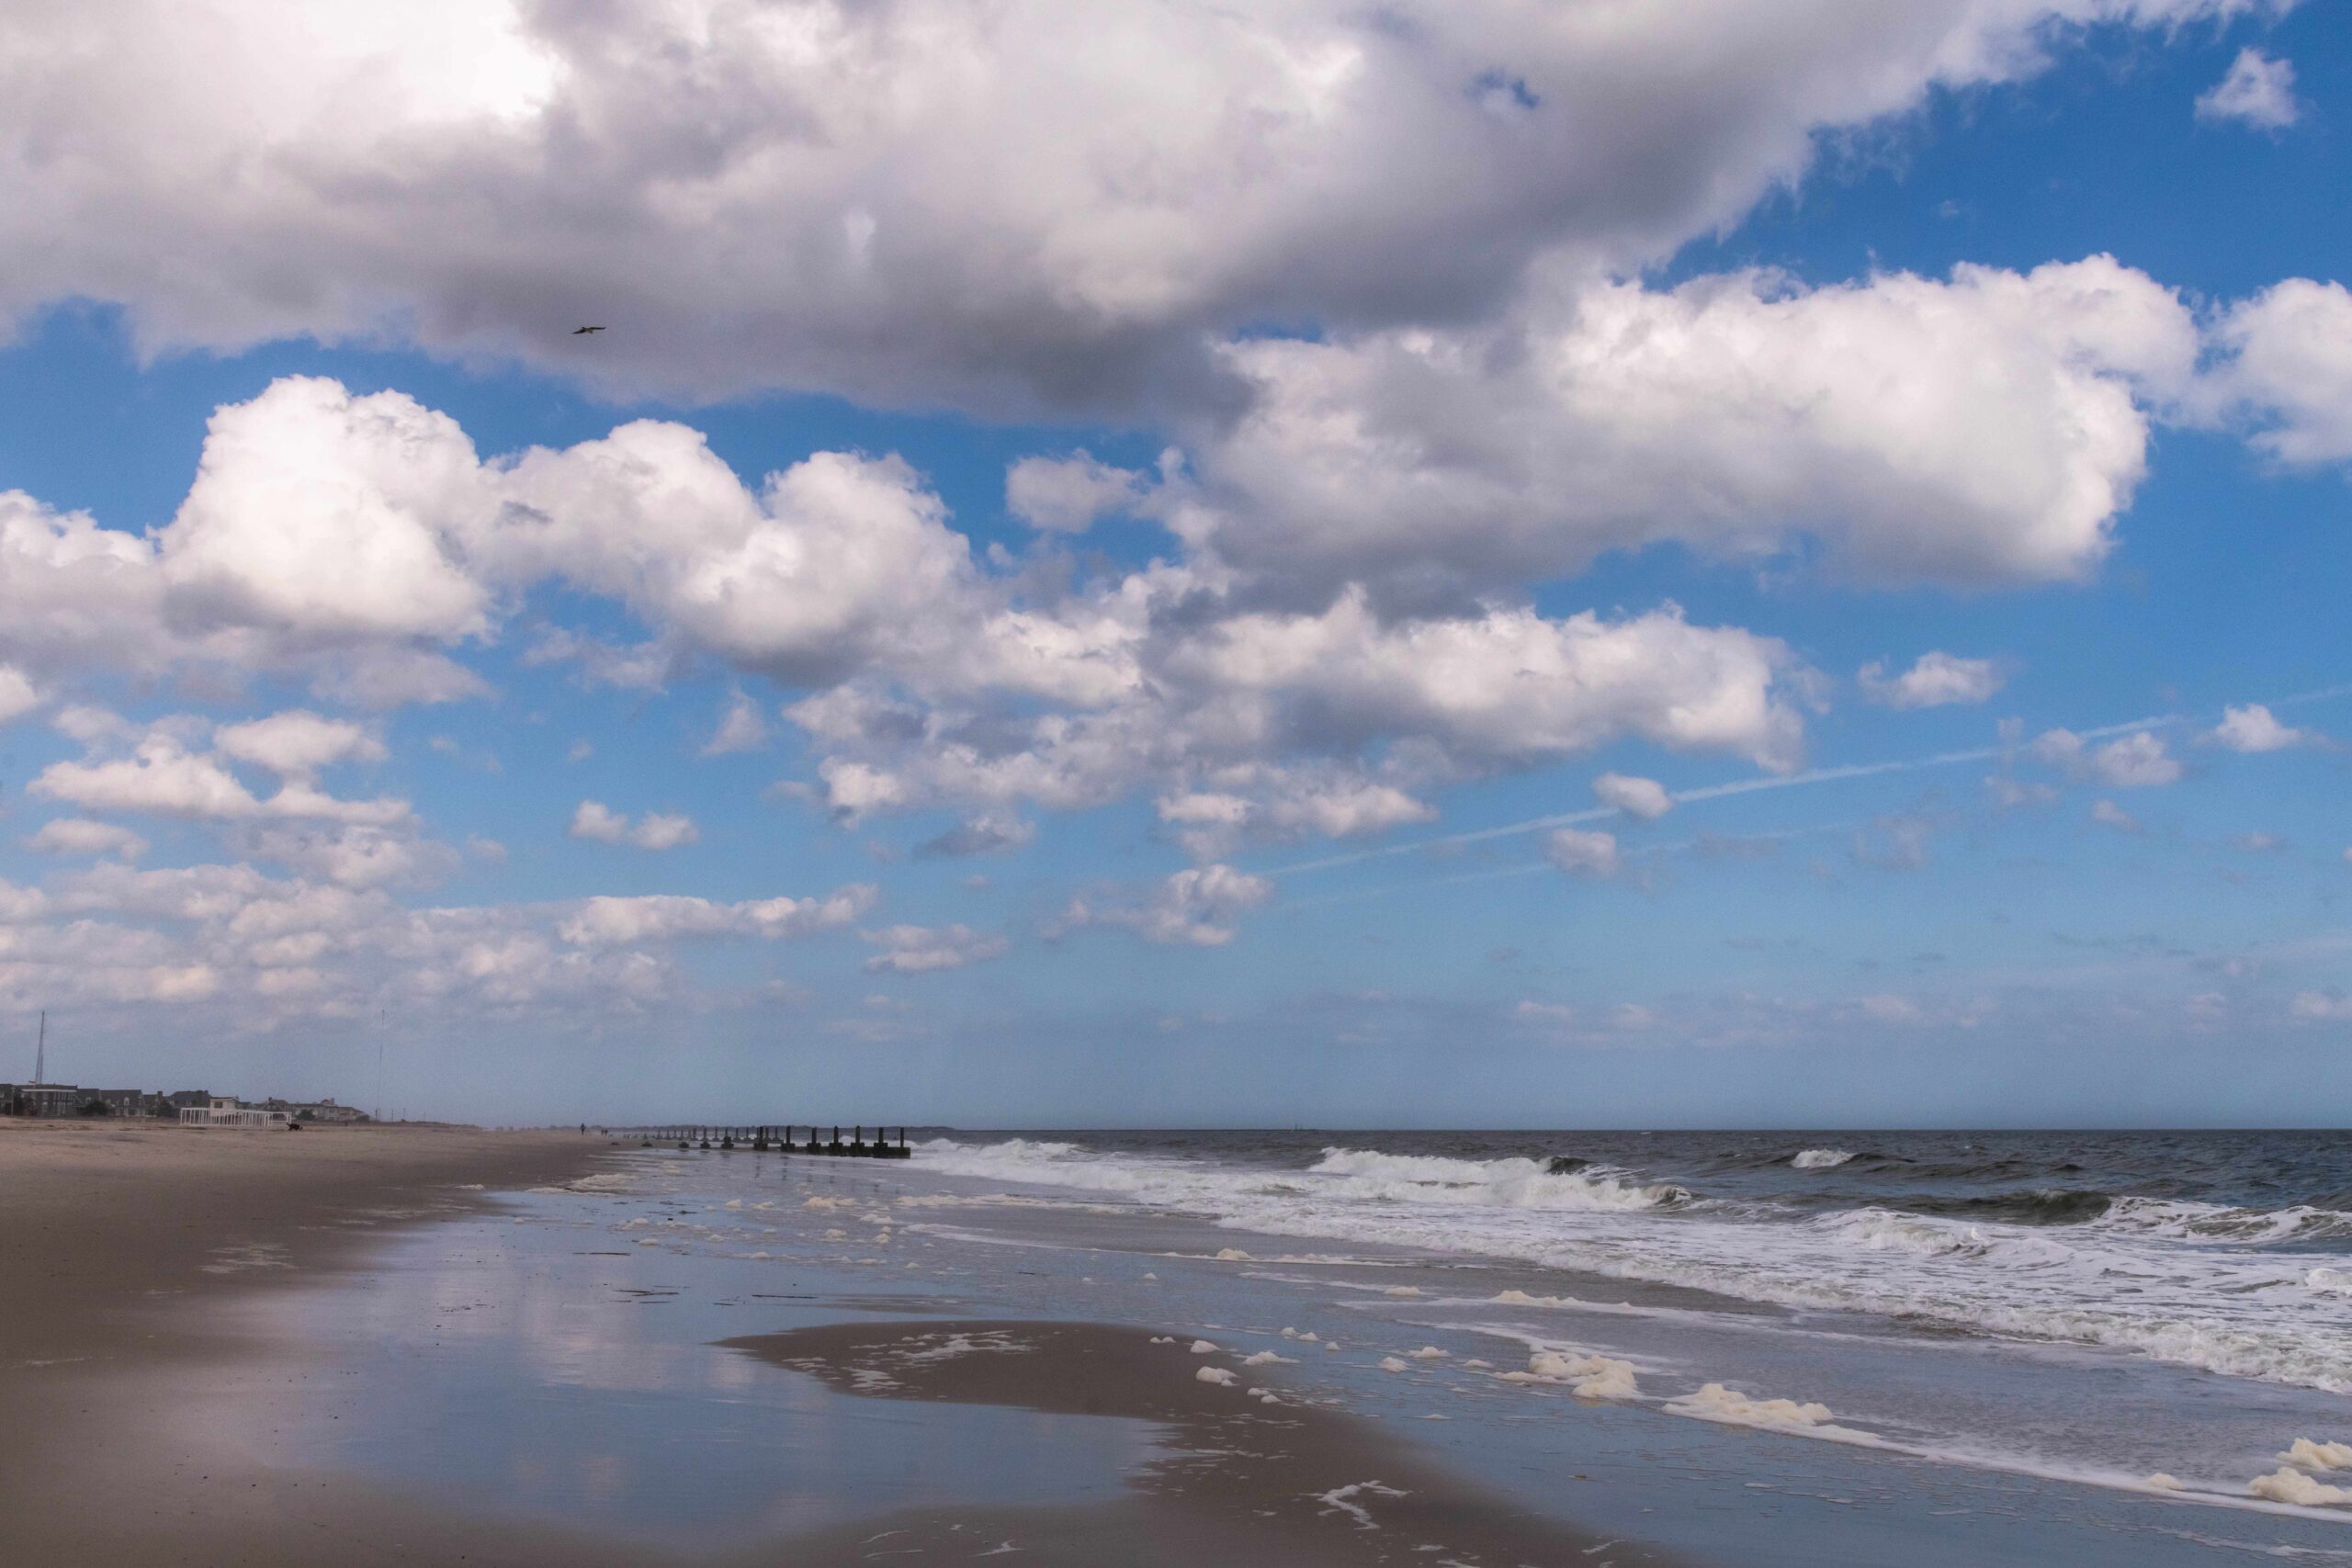 Puffy white clouds in a blue sky reflected in the sand and ocean, with waves rolling into the shoreline